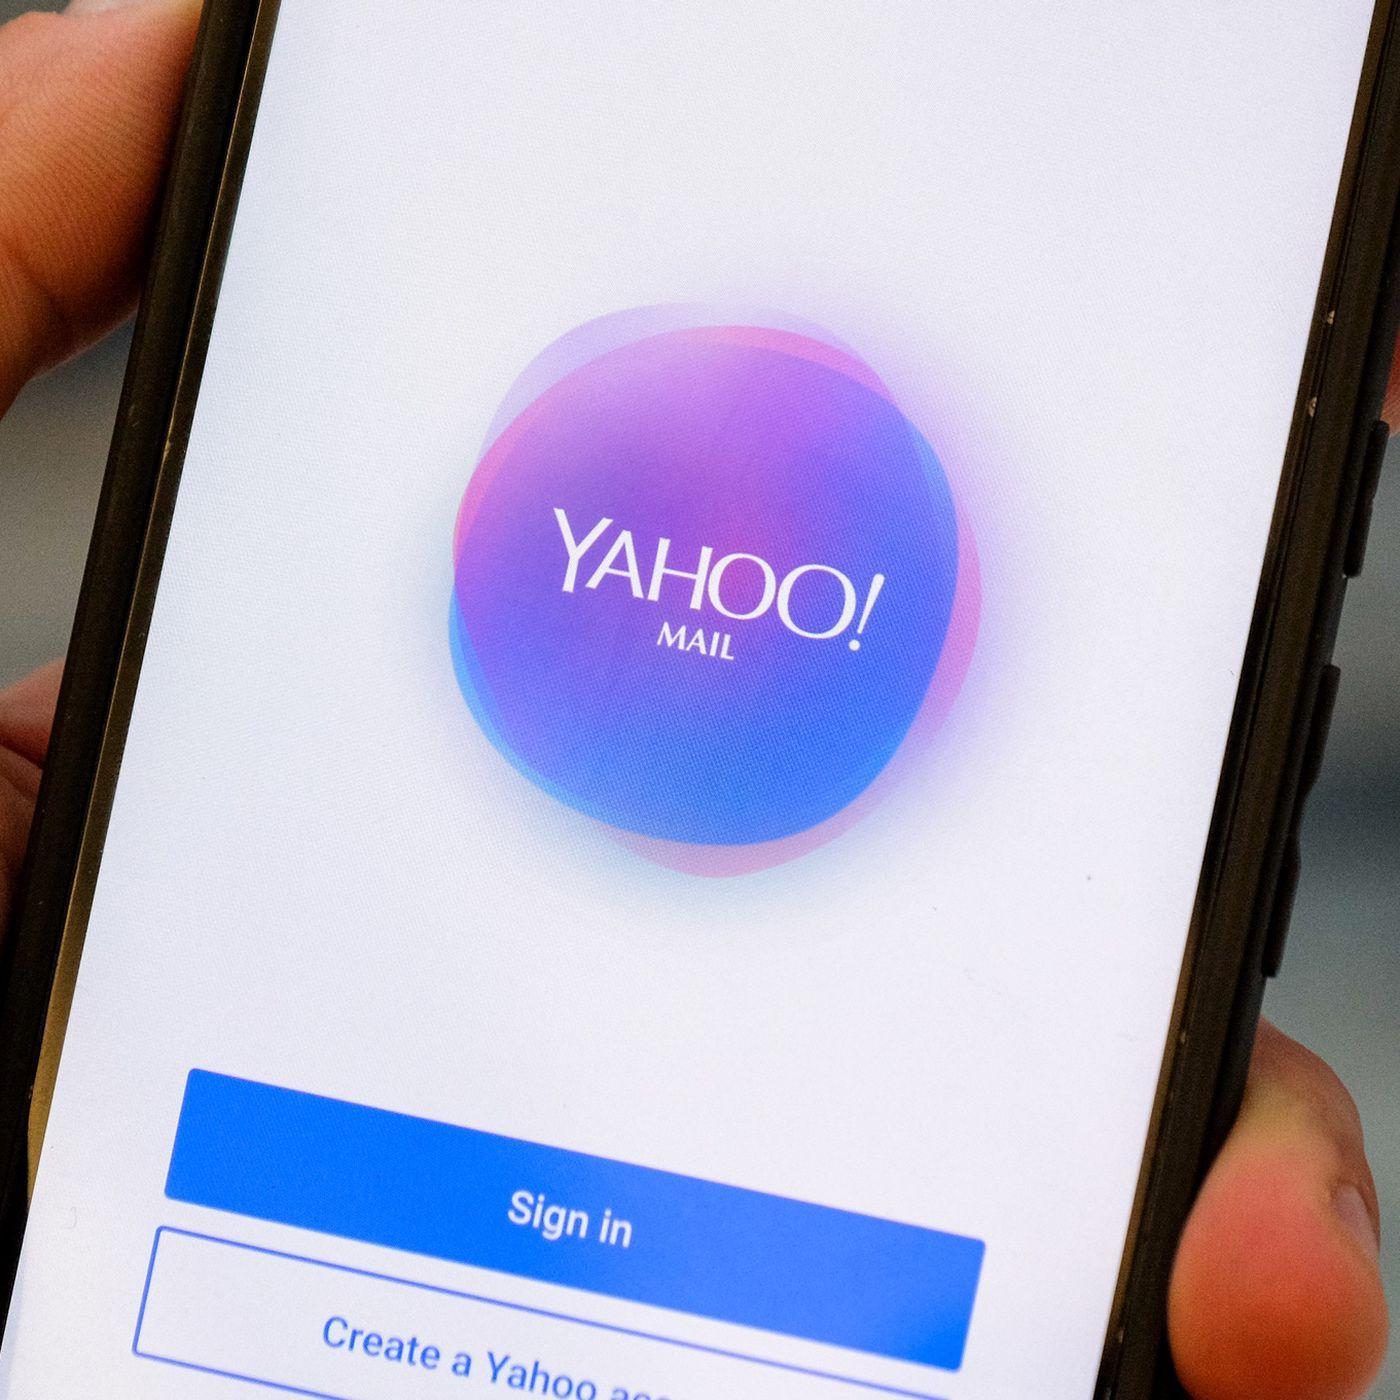 AOL Mail Logo - Oath's new privacy policy allows it to scan your Yahoo and AOL mail ...